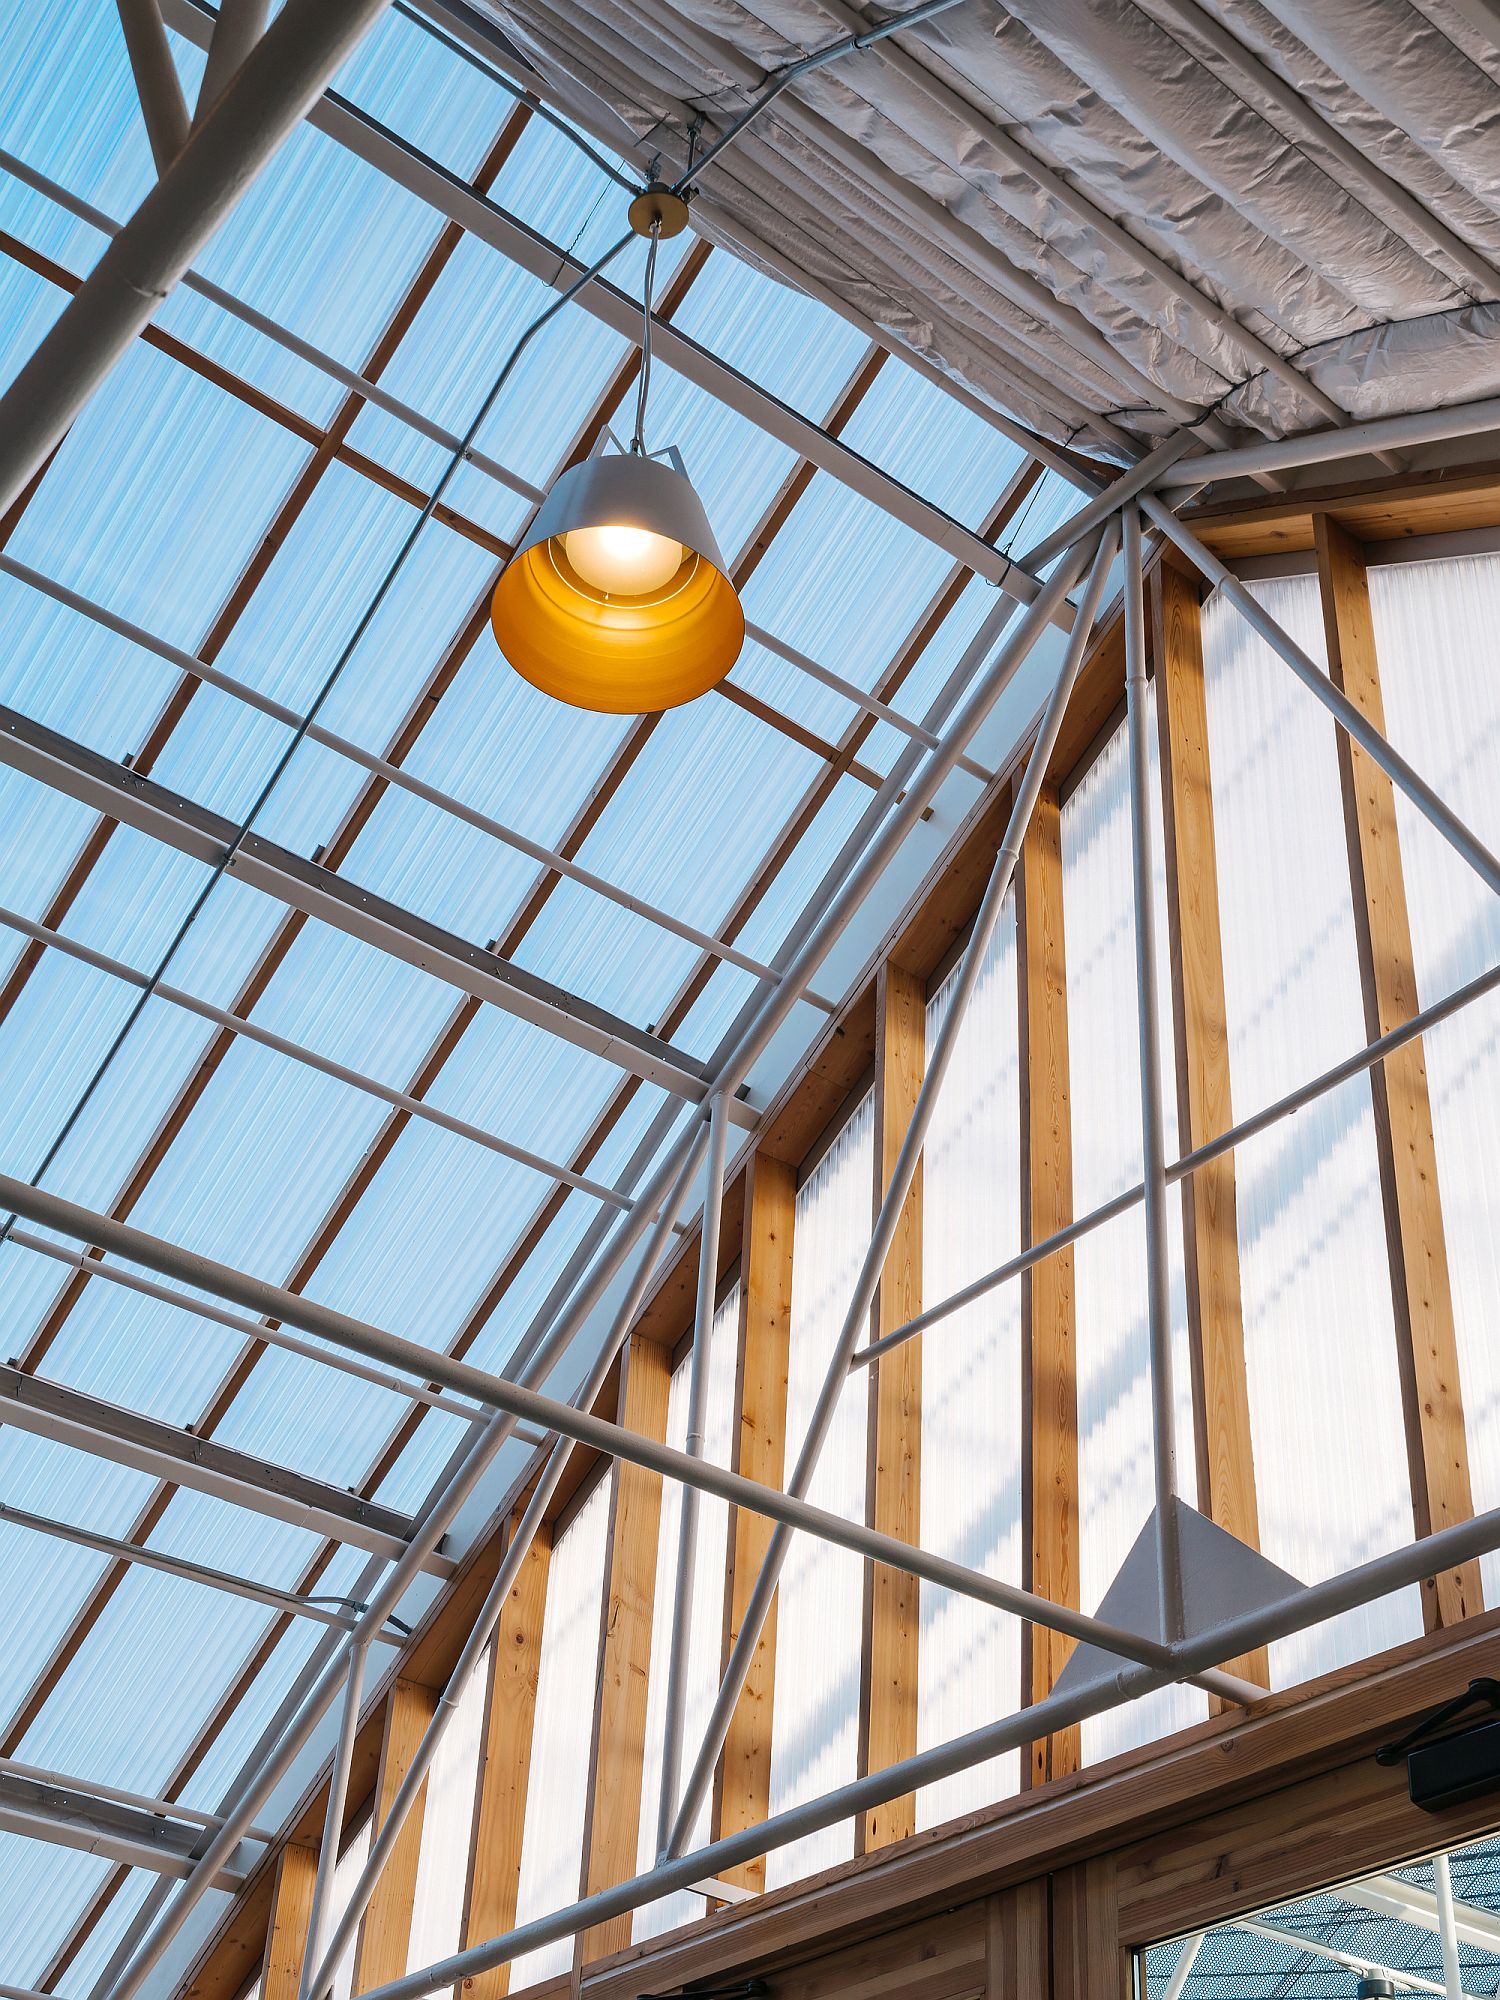 Polycarbonate panels and industrial lighting inside the cafe